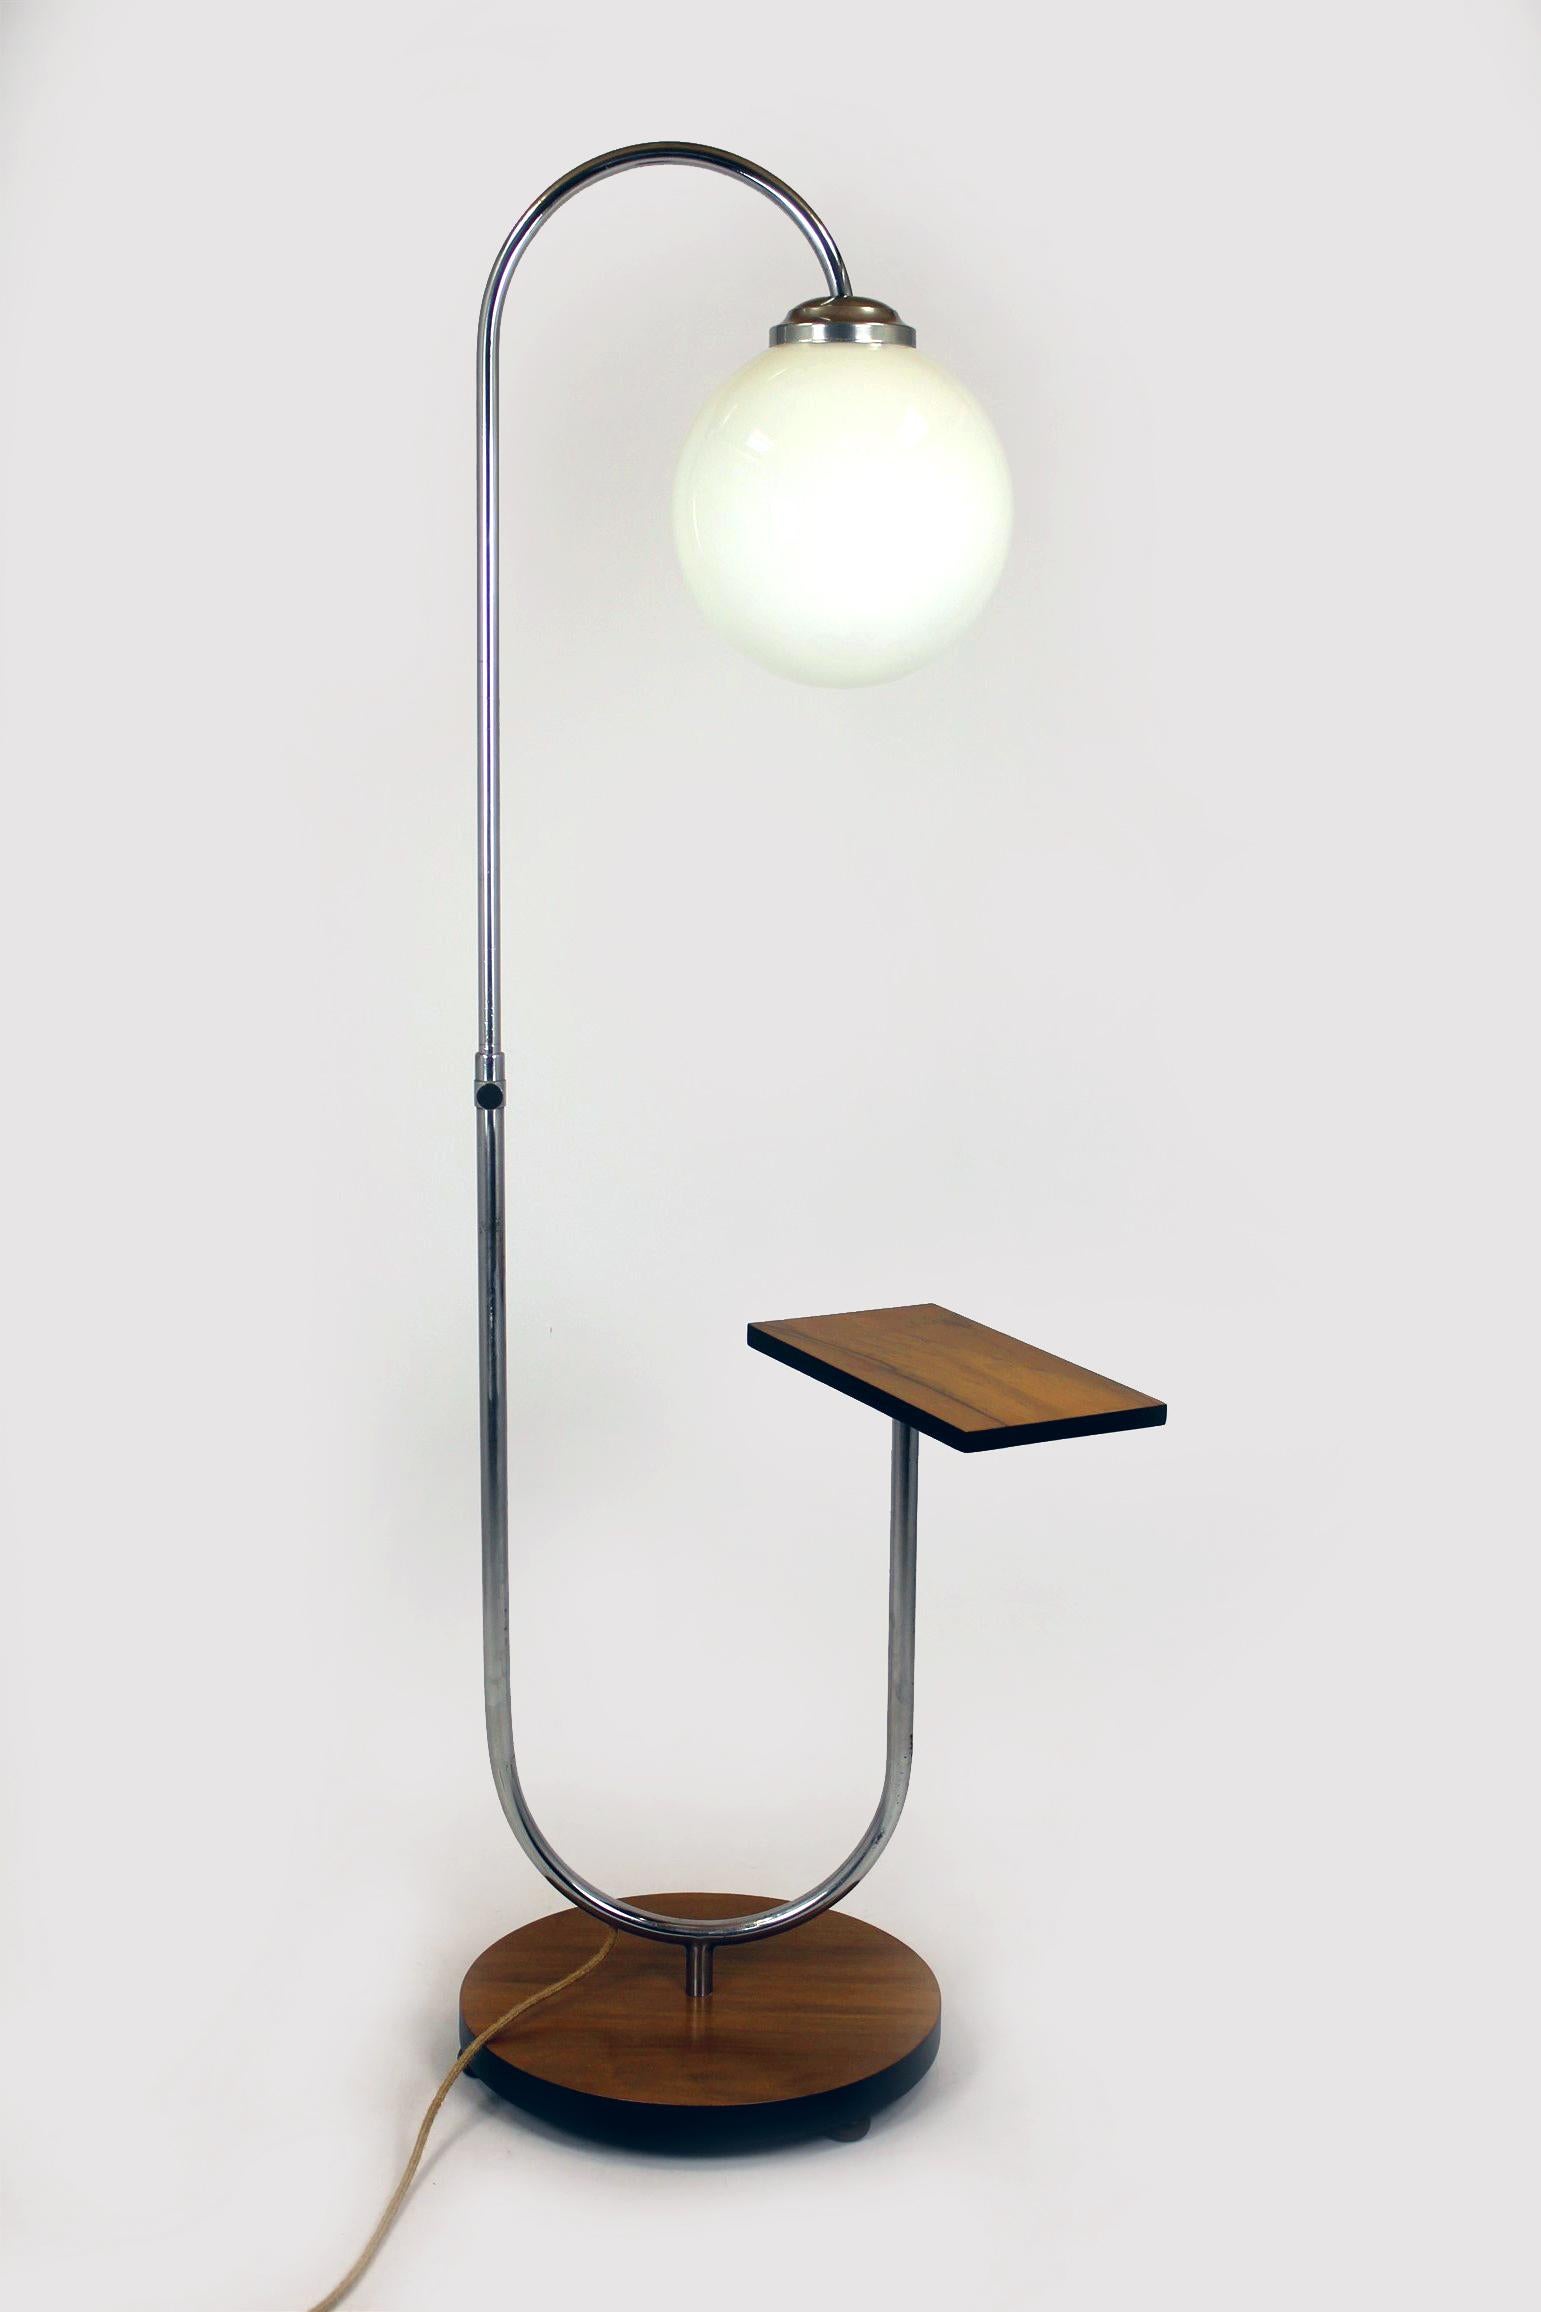 This Bauhaus floor lamp was designed by Jindrich Halabala and manufactured in the Czech Republic in the 1940s. The lamp has been refurbished - it has a new electric cable, floor switch and plug, all in a retro style. The wooden elements have been